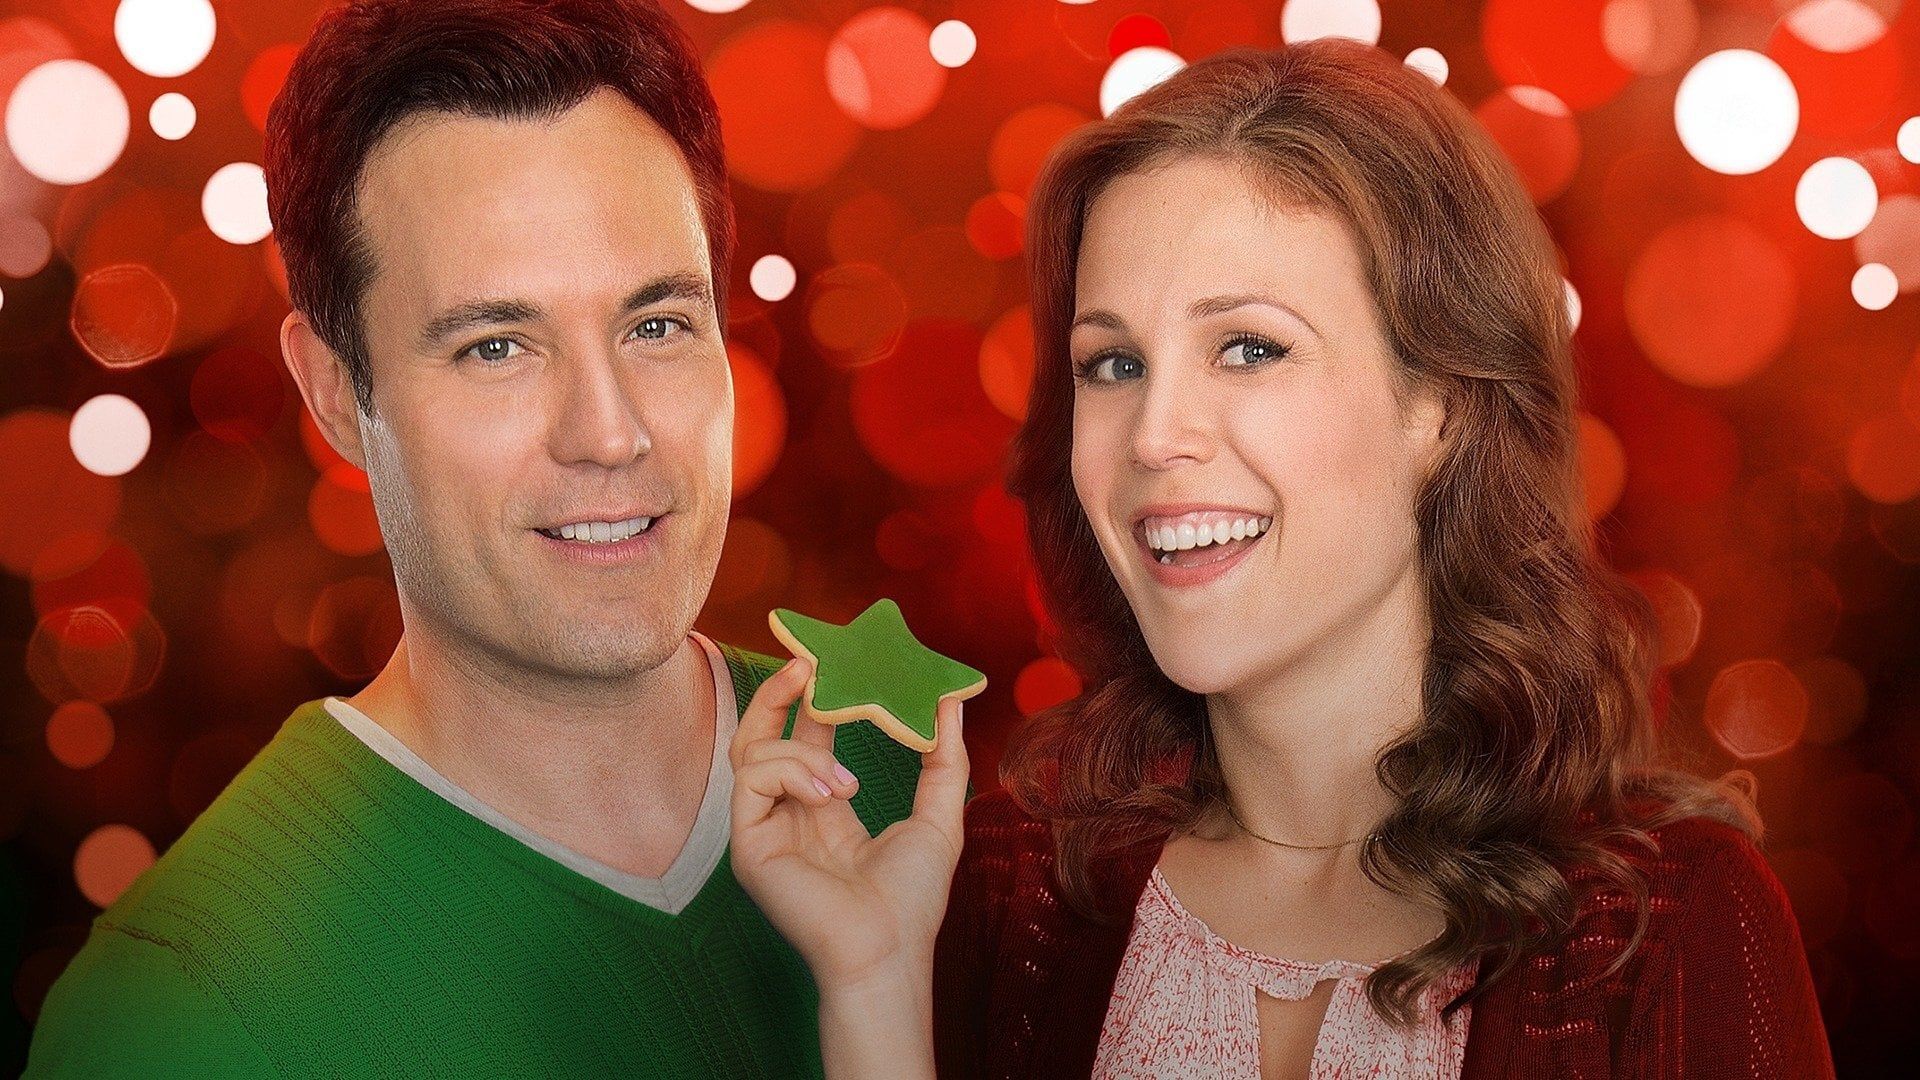 A Cookie Cutter Christmas background